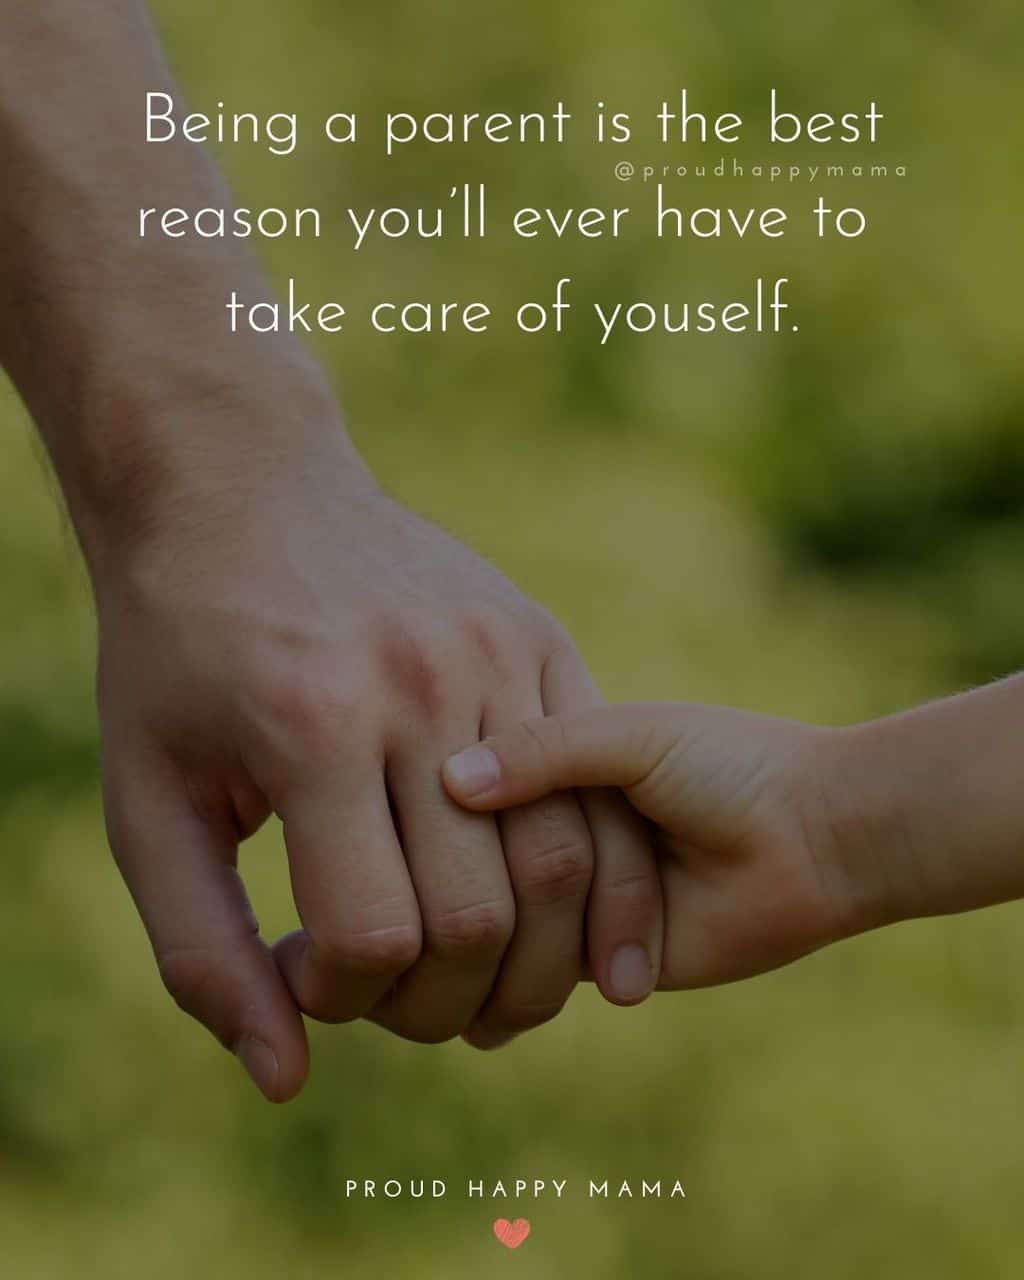 Parenting Quotes - Parenting Quotes - Being a parent is the best reason you’ll ever have to take care of youself.’